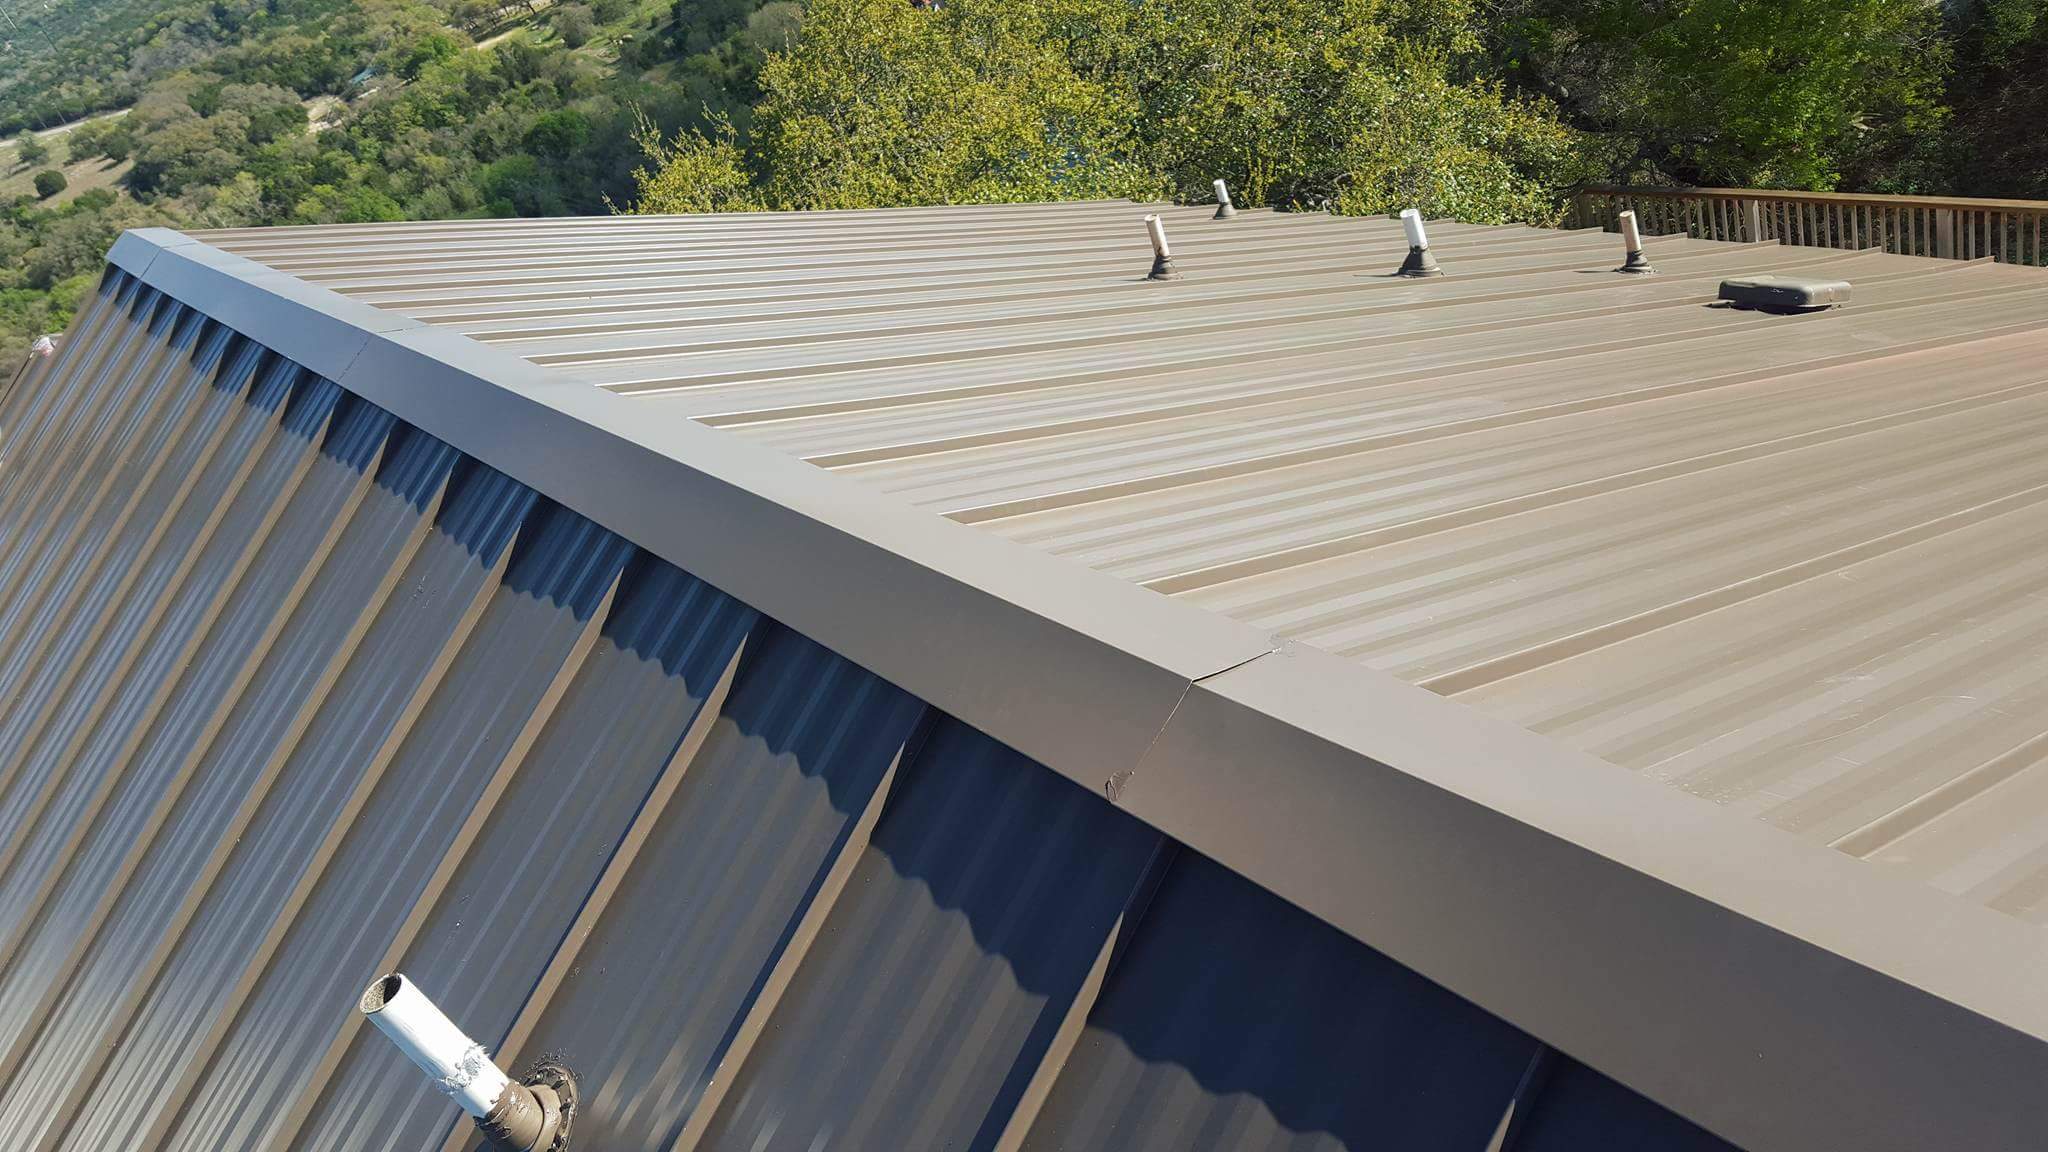 Multi-Family Metal Roof Austin Roofing and Construction